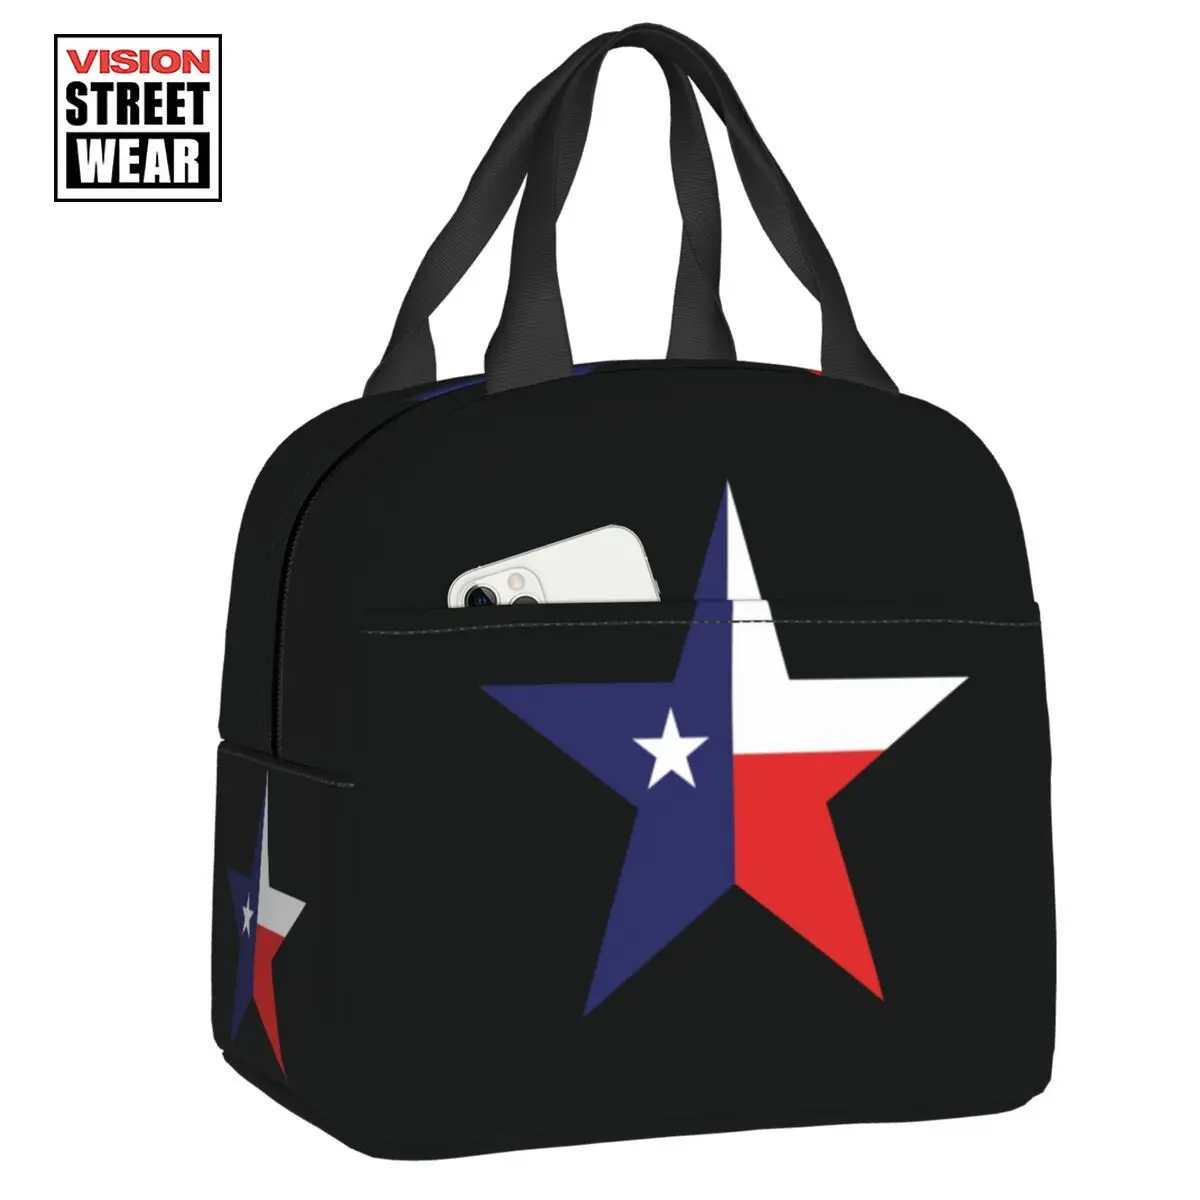 

2023 New Texas Lone Star Logo Insulated Lunch Tote Bag For Flag Of Texas Resuable Thermal Cooler Bento Box Kids School Children